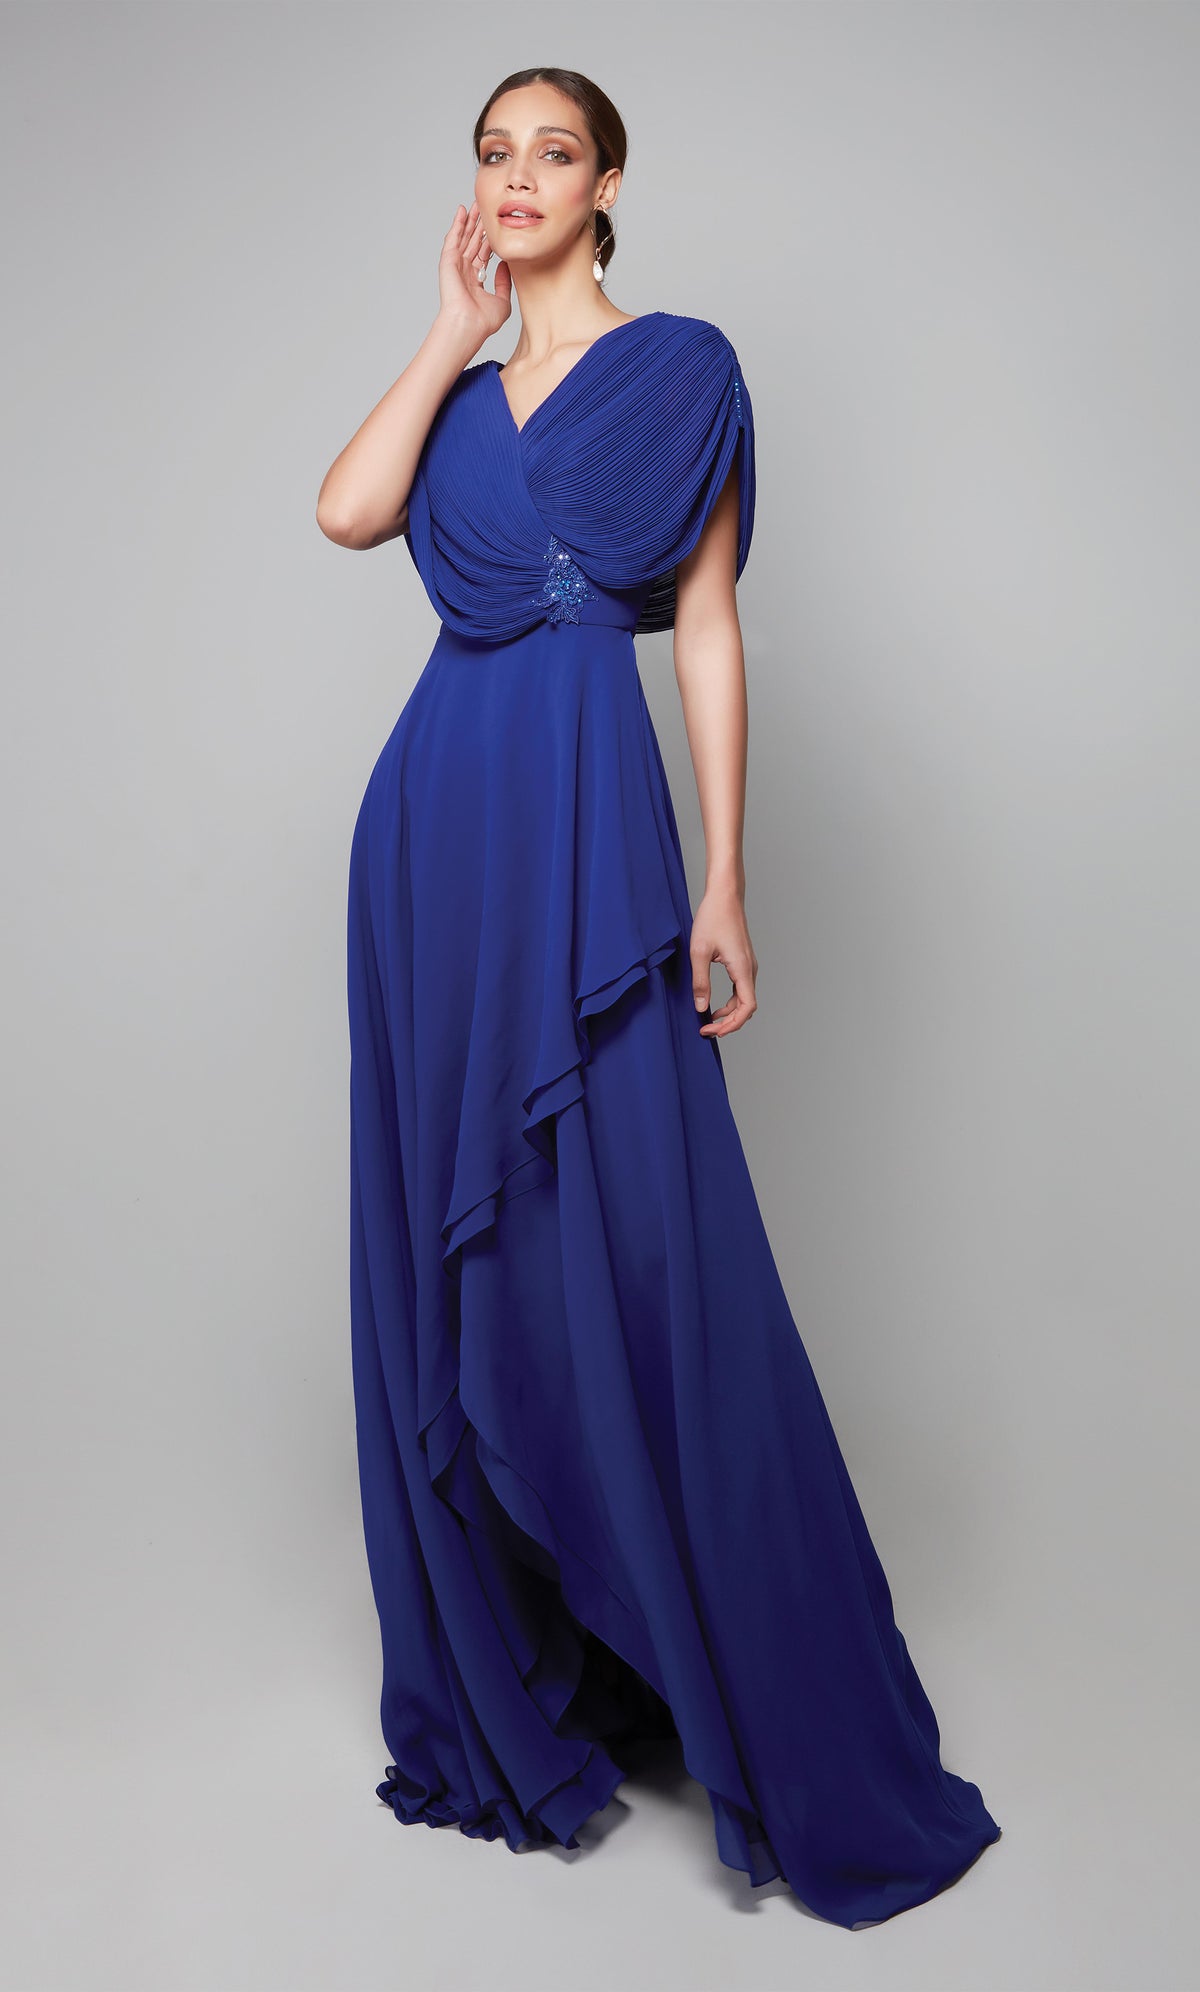 Flowy chiffon gown with a draped top, tiered skirt, and decorative lace applique at the natural waist in cobalt blue. Color-SWATCH_27592__COBALT